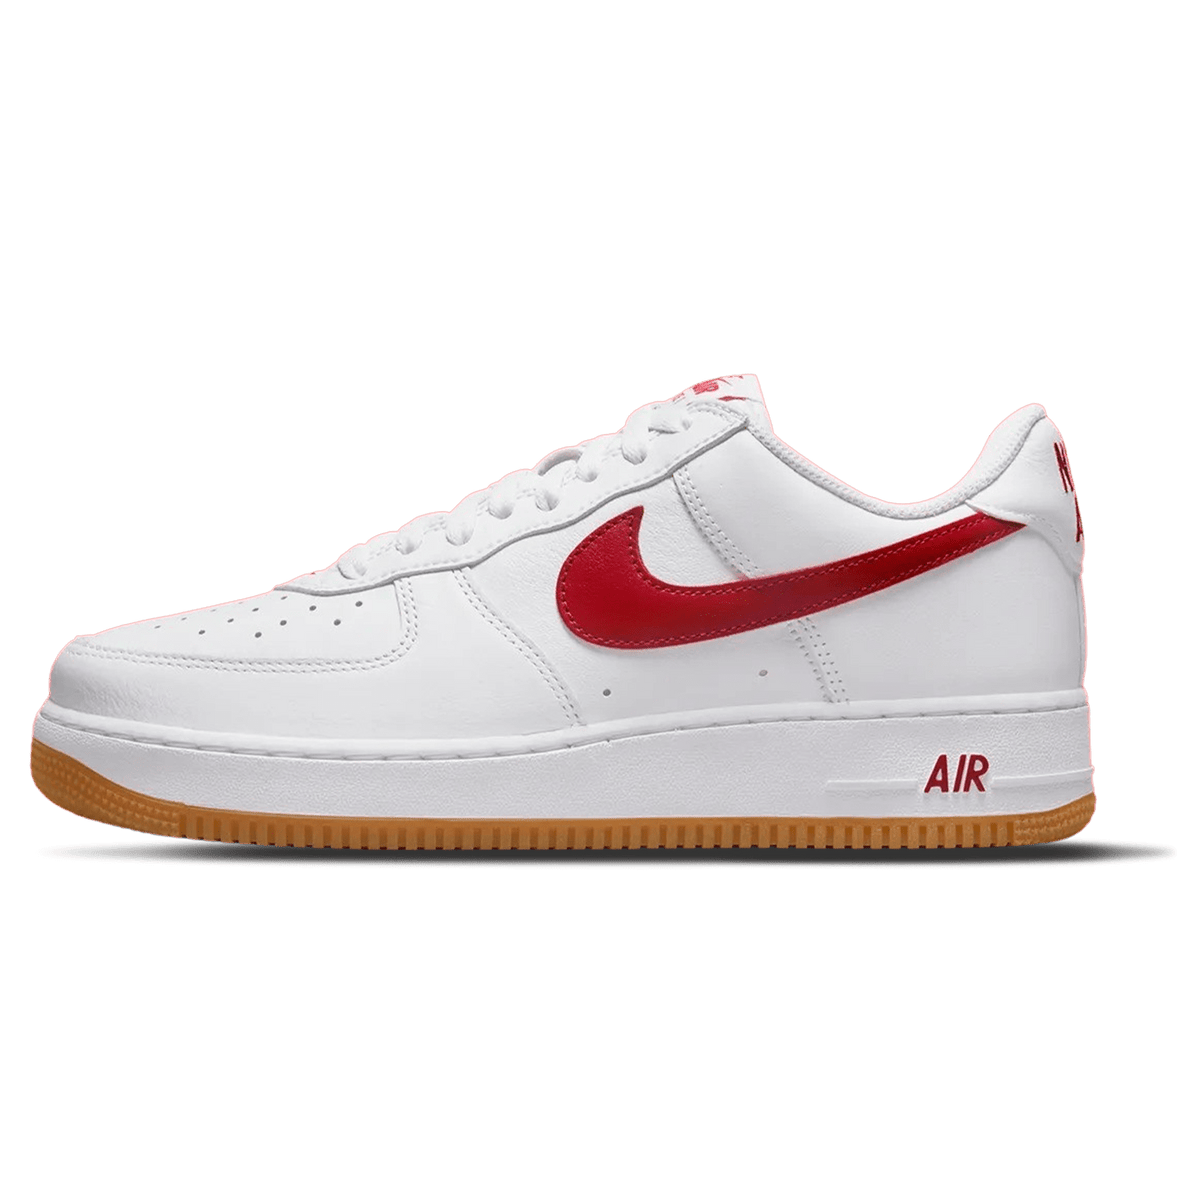 Louis Vuitton x Nike Air Force 1 Red | Size 8.5, Sneaker in Red/White